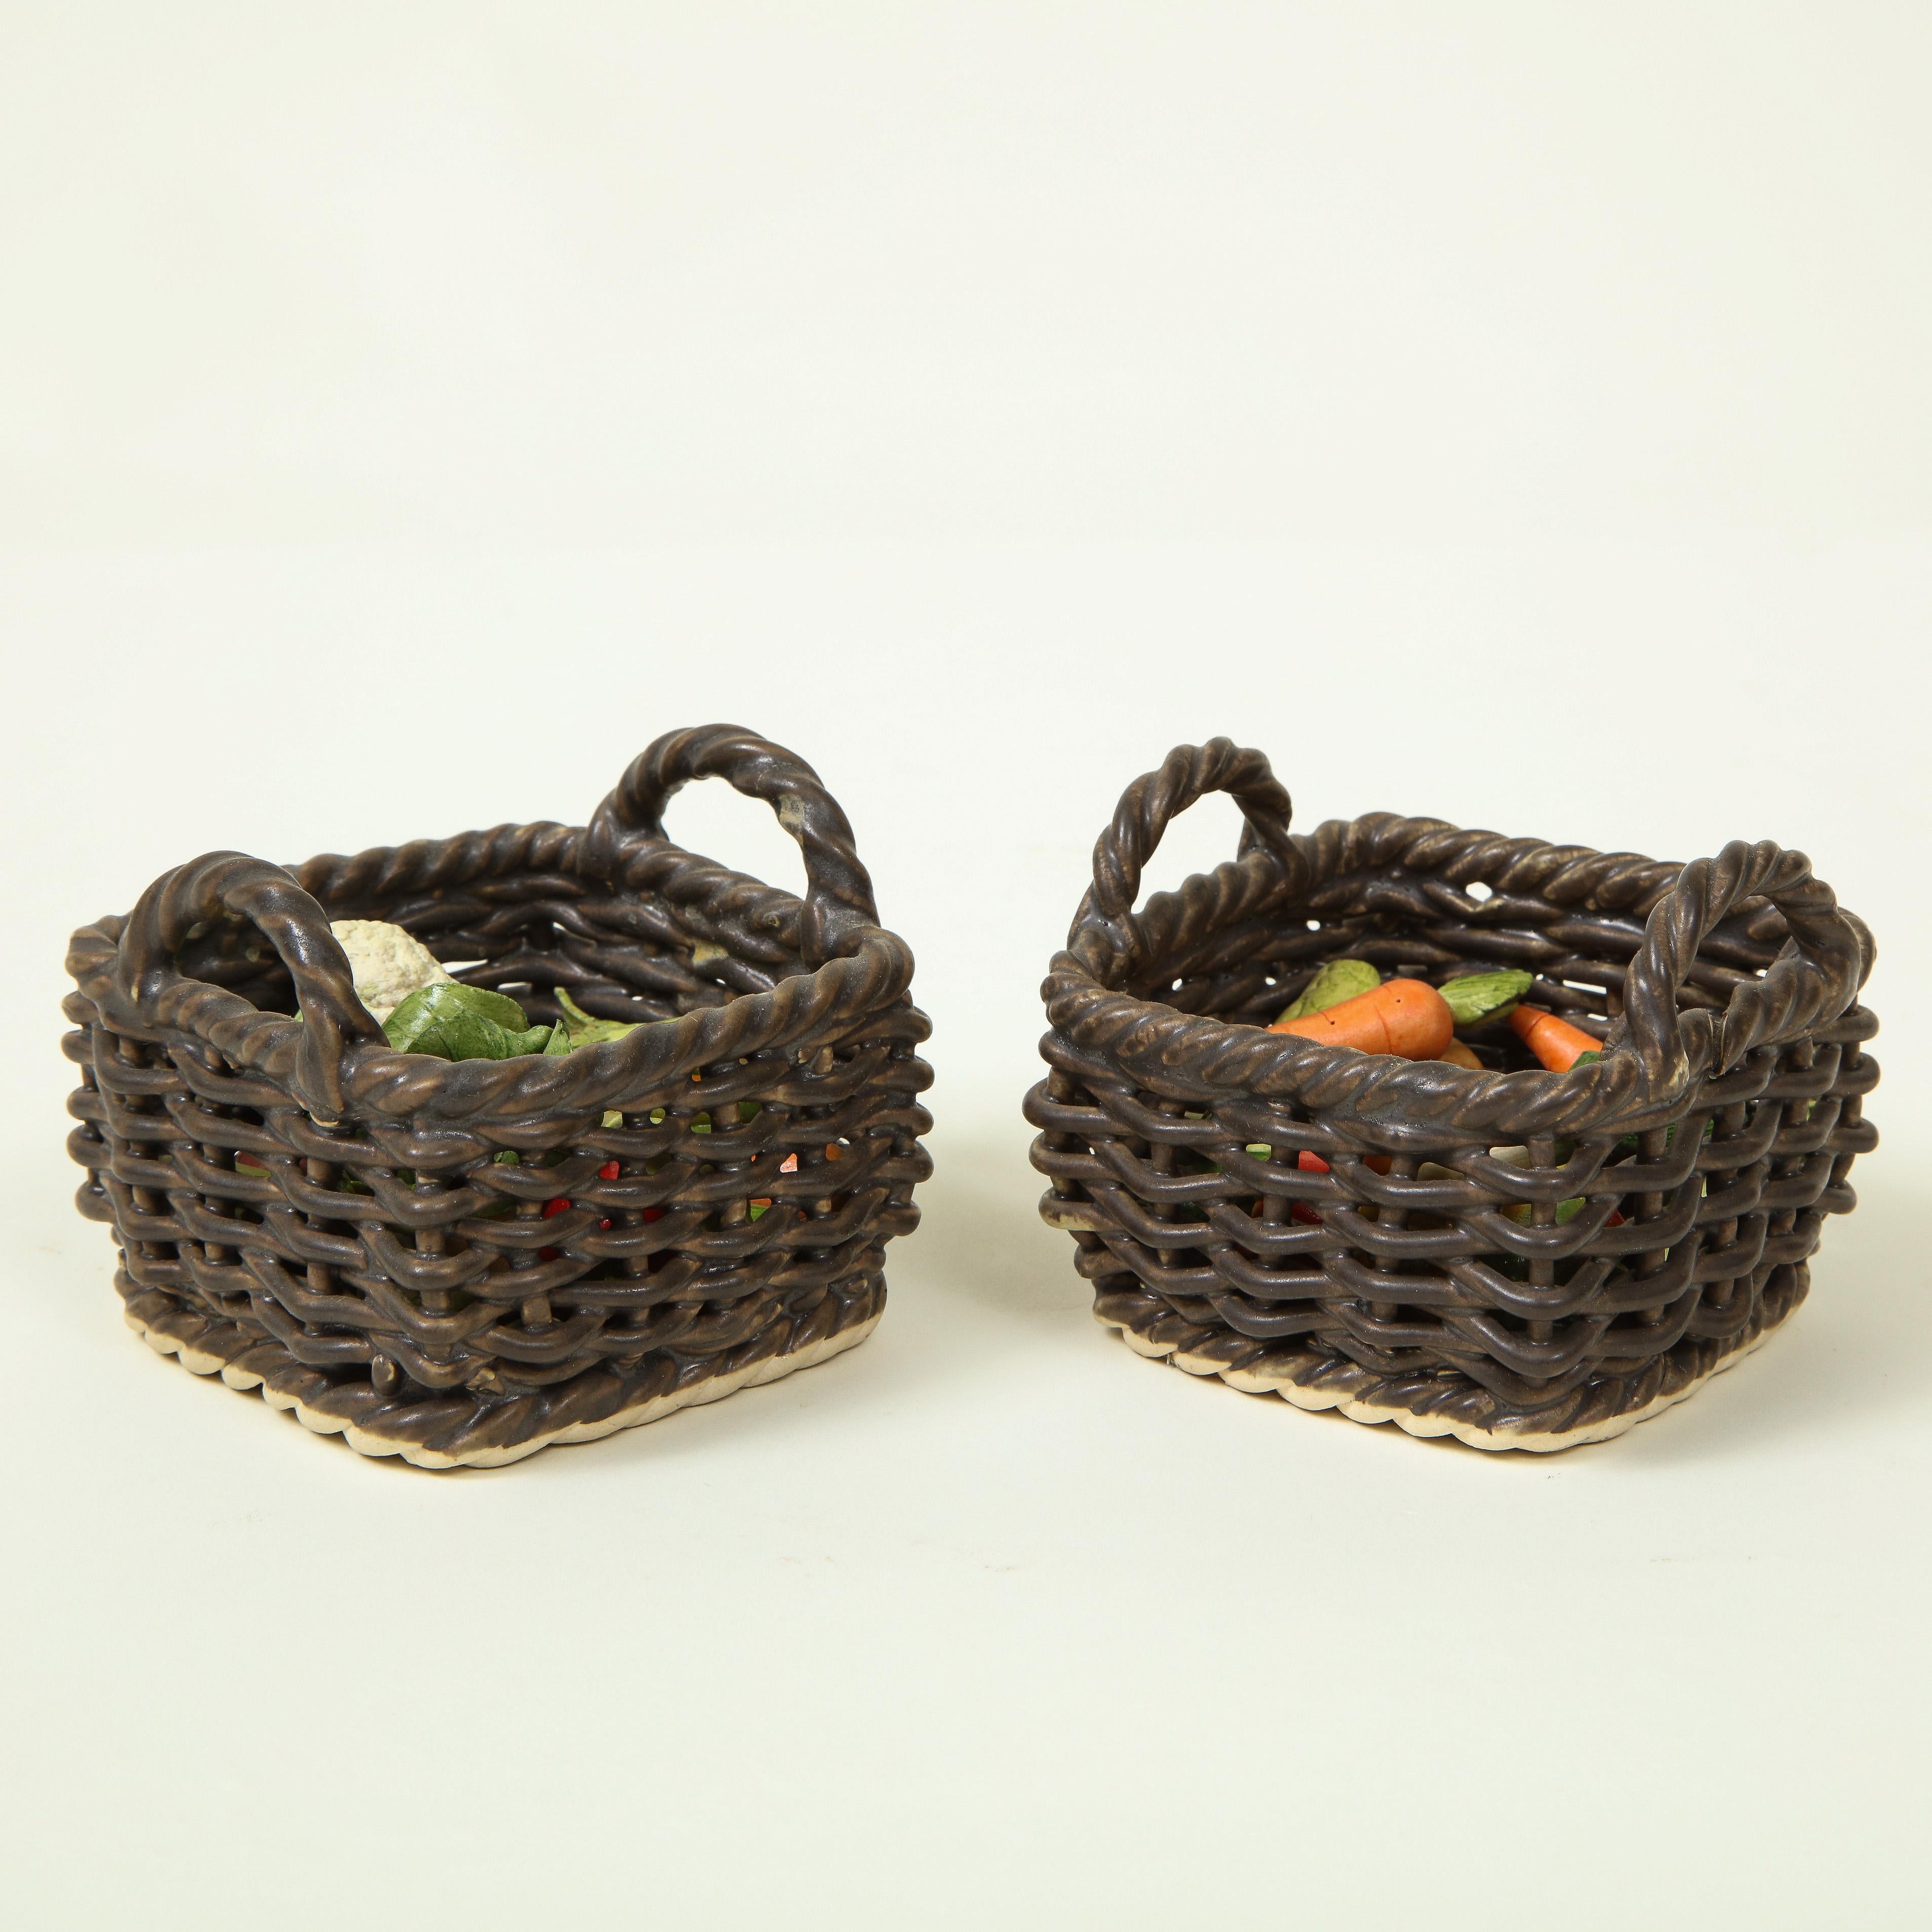 Each finely modeled as a brown two-handled wicker basket filled with hand-painted vegetables including carrots, cauliflower, and endives.
 